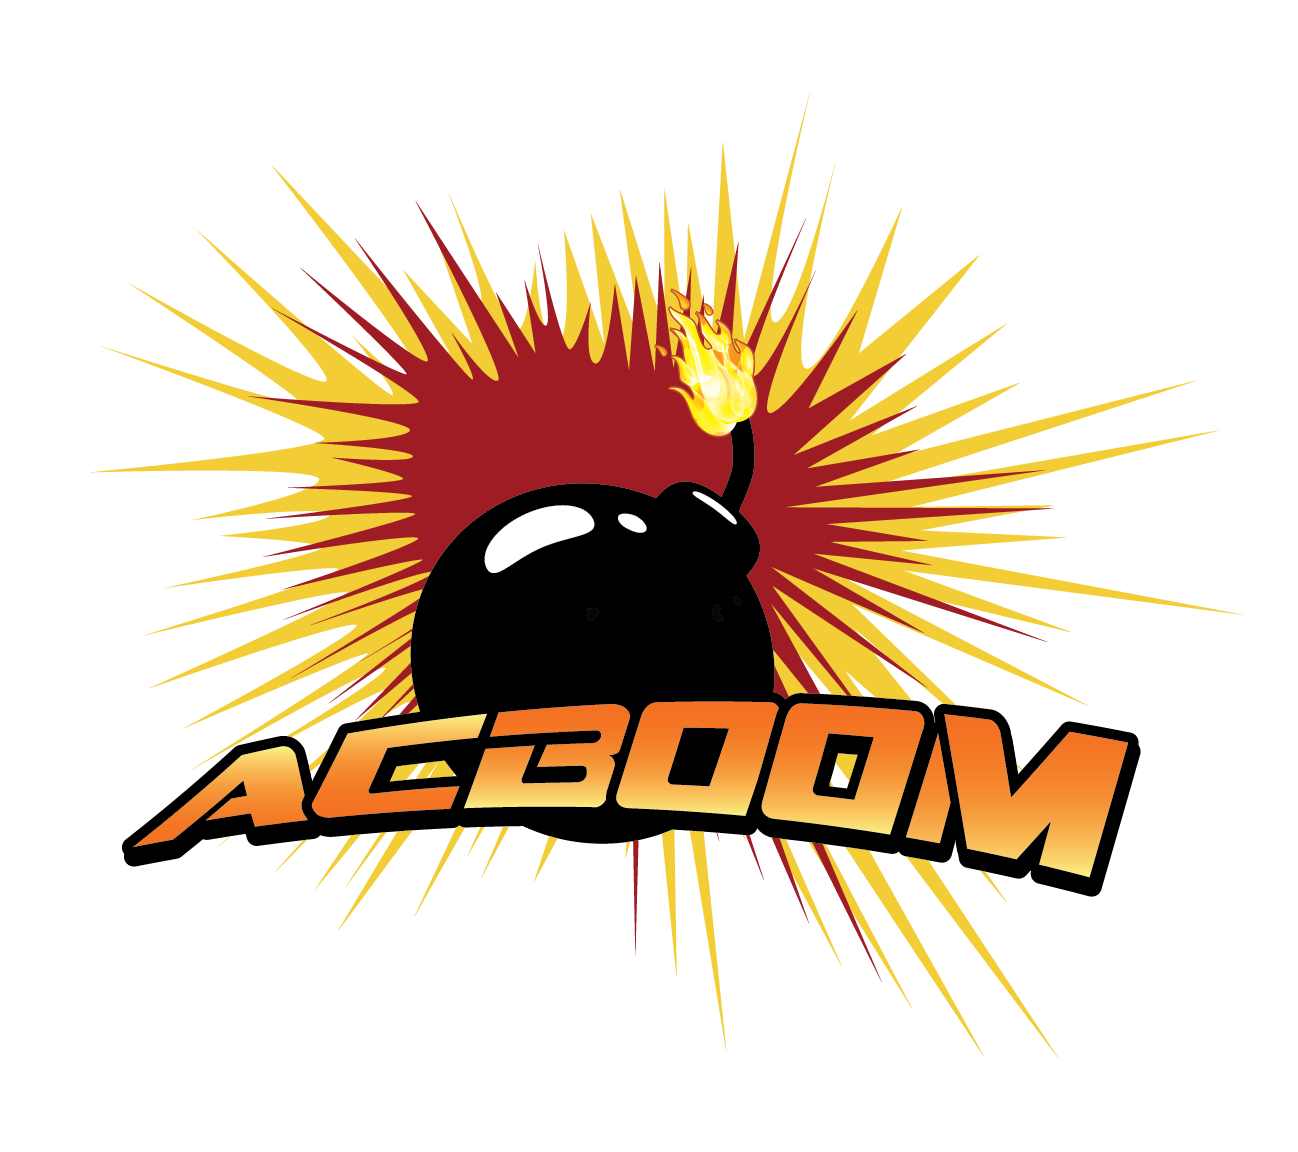 AC BOOM INC  - South Florida Live Fireworks, Pyrotechnic, and Fire Effects